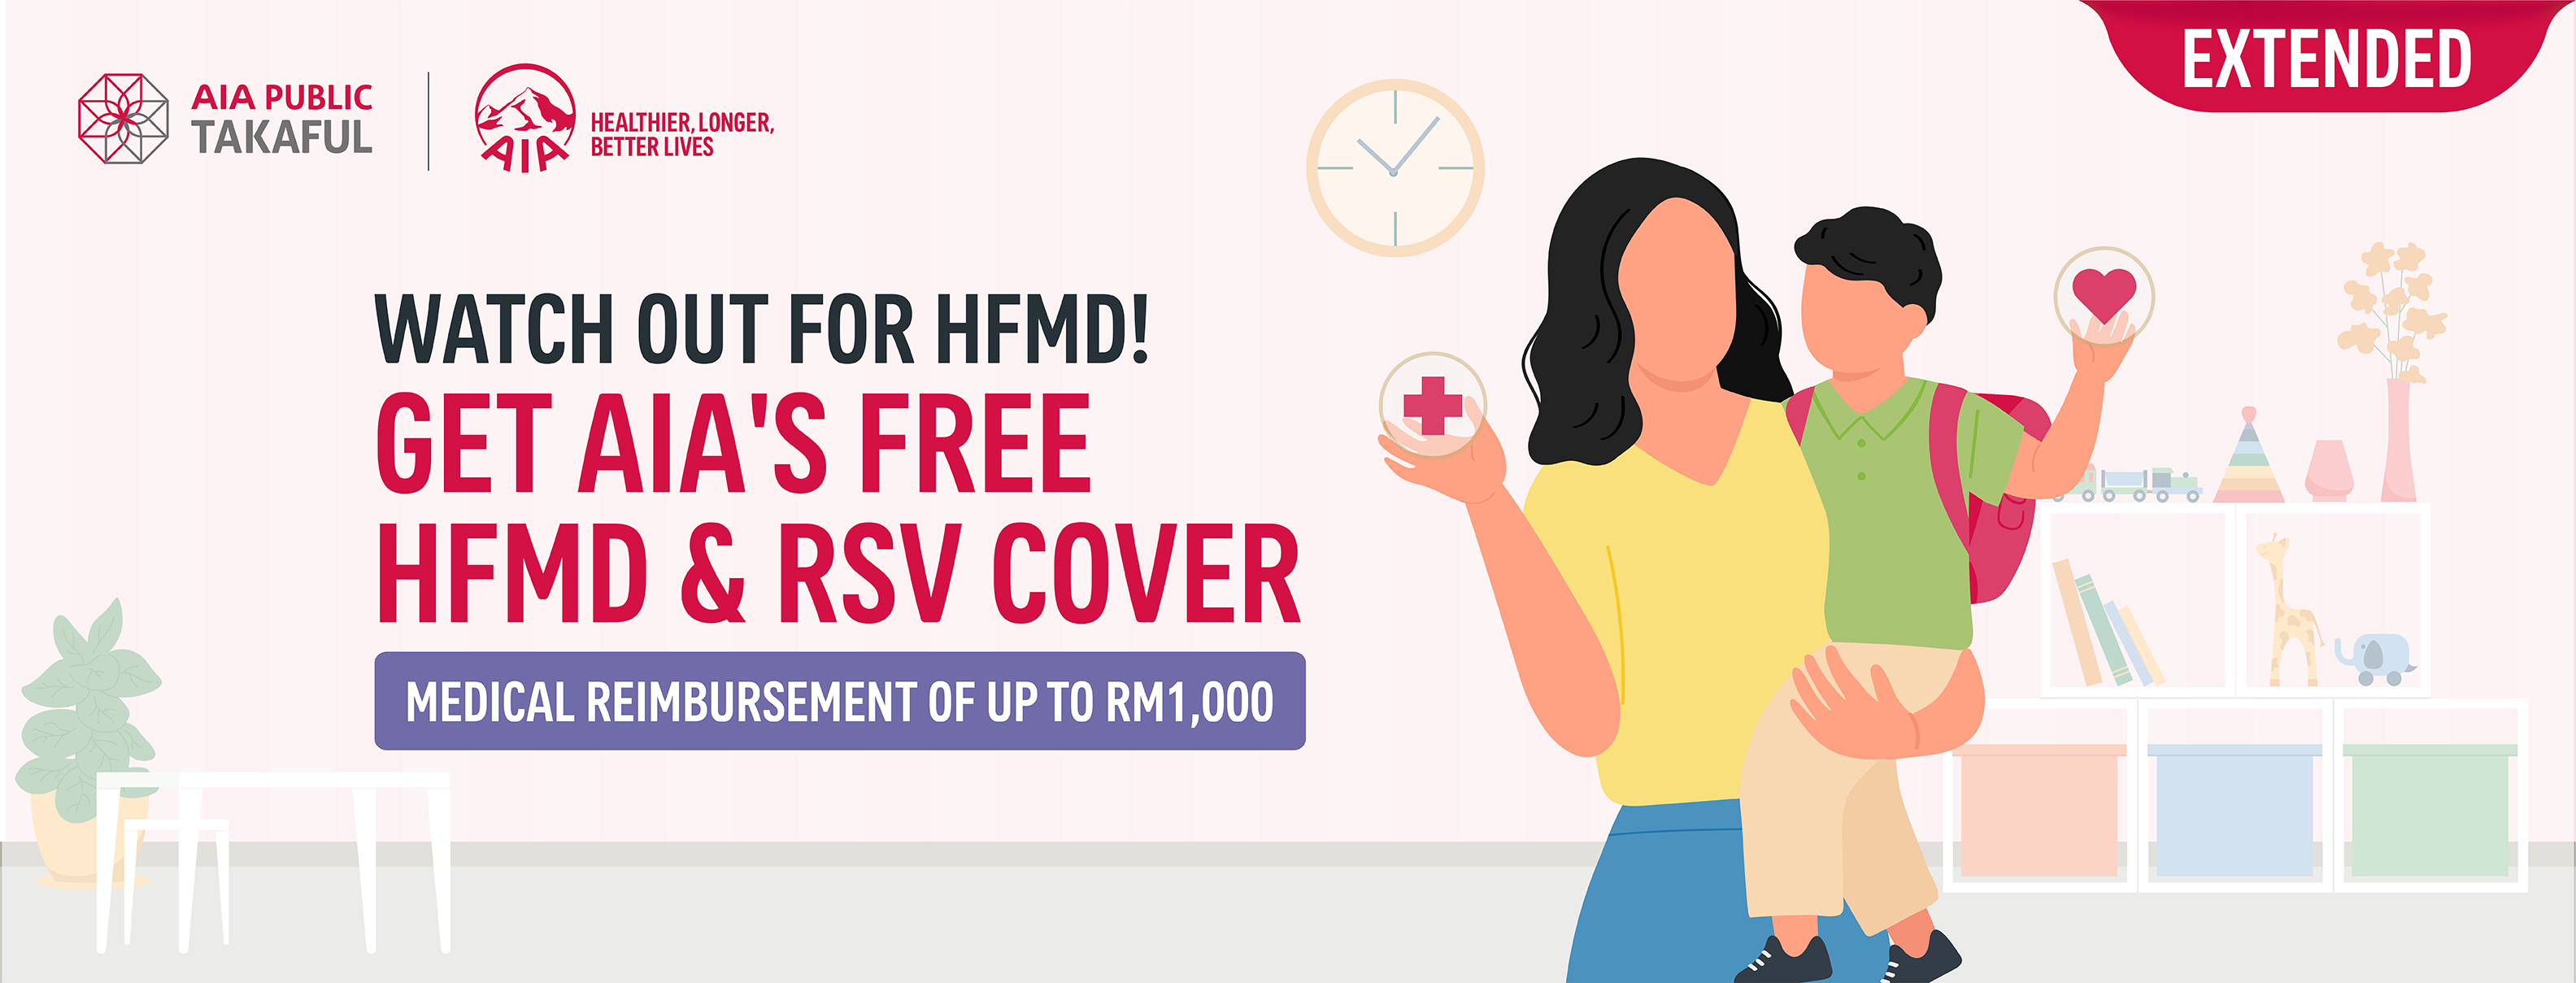 Free HFMD & RSV Cover